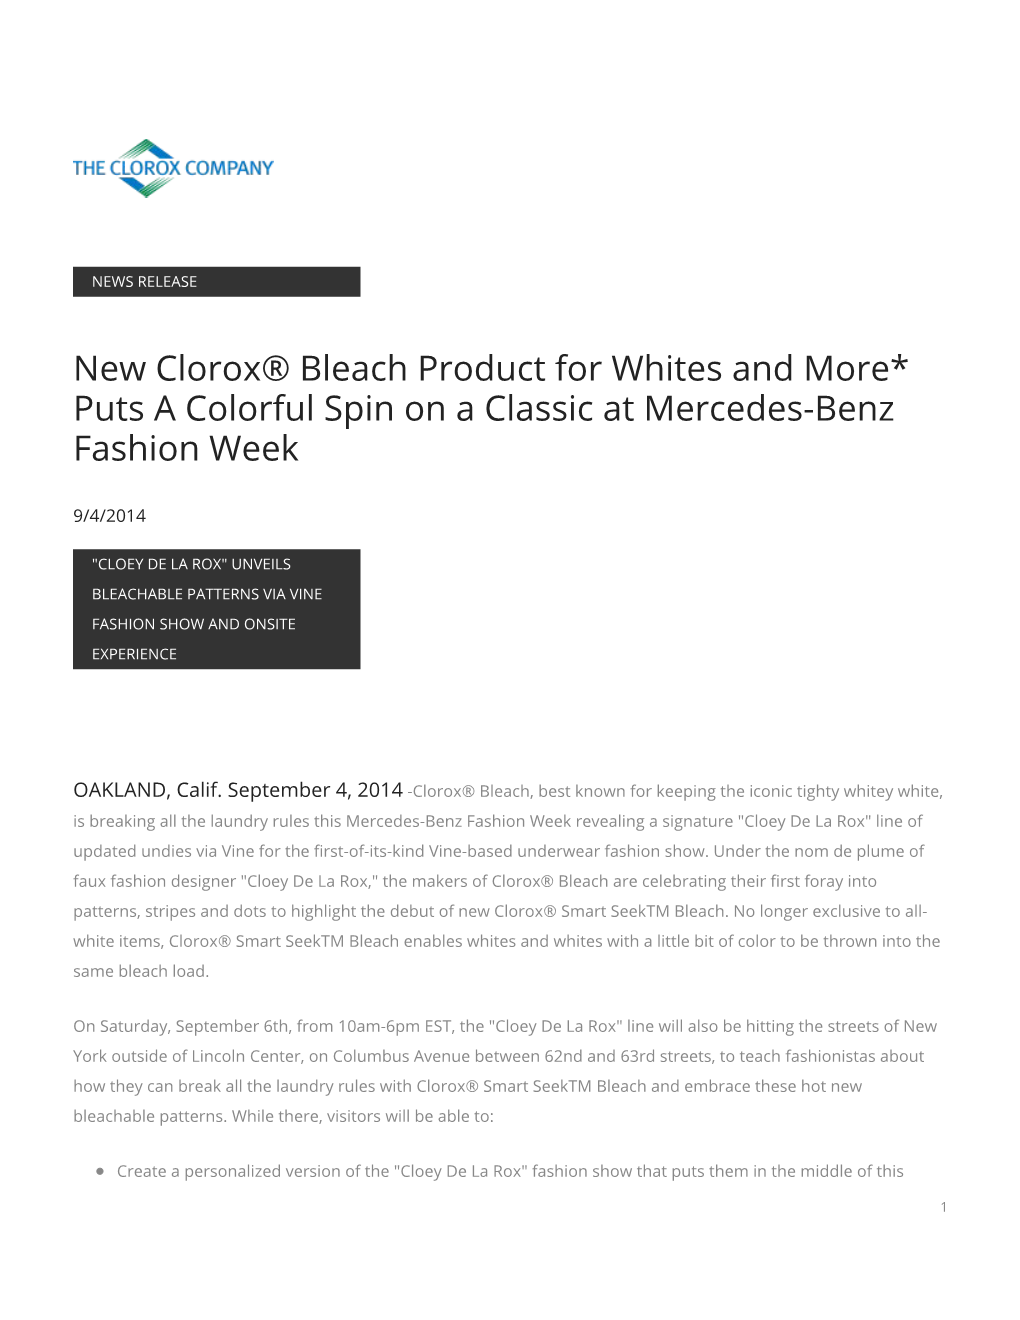 New Clorox® Bleach Product for Whites and More* Puts a Colorful Spin on a Classic at Mercedes-Benz Fashion Week